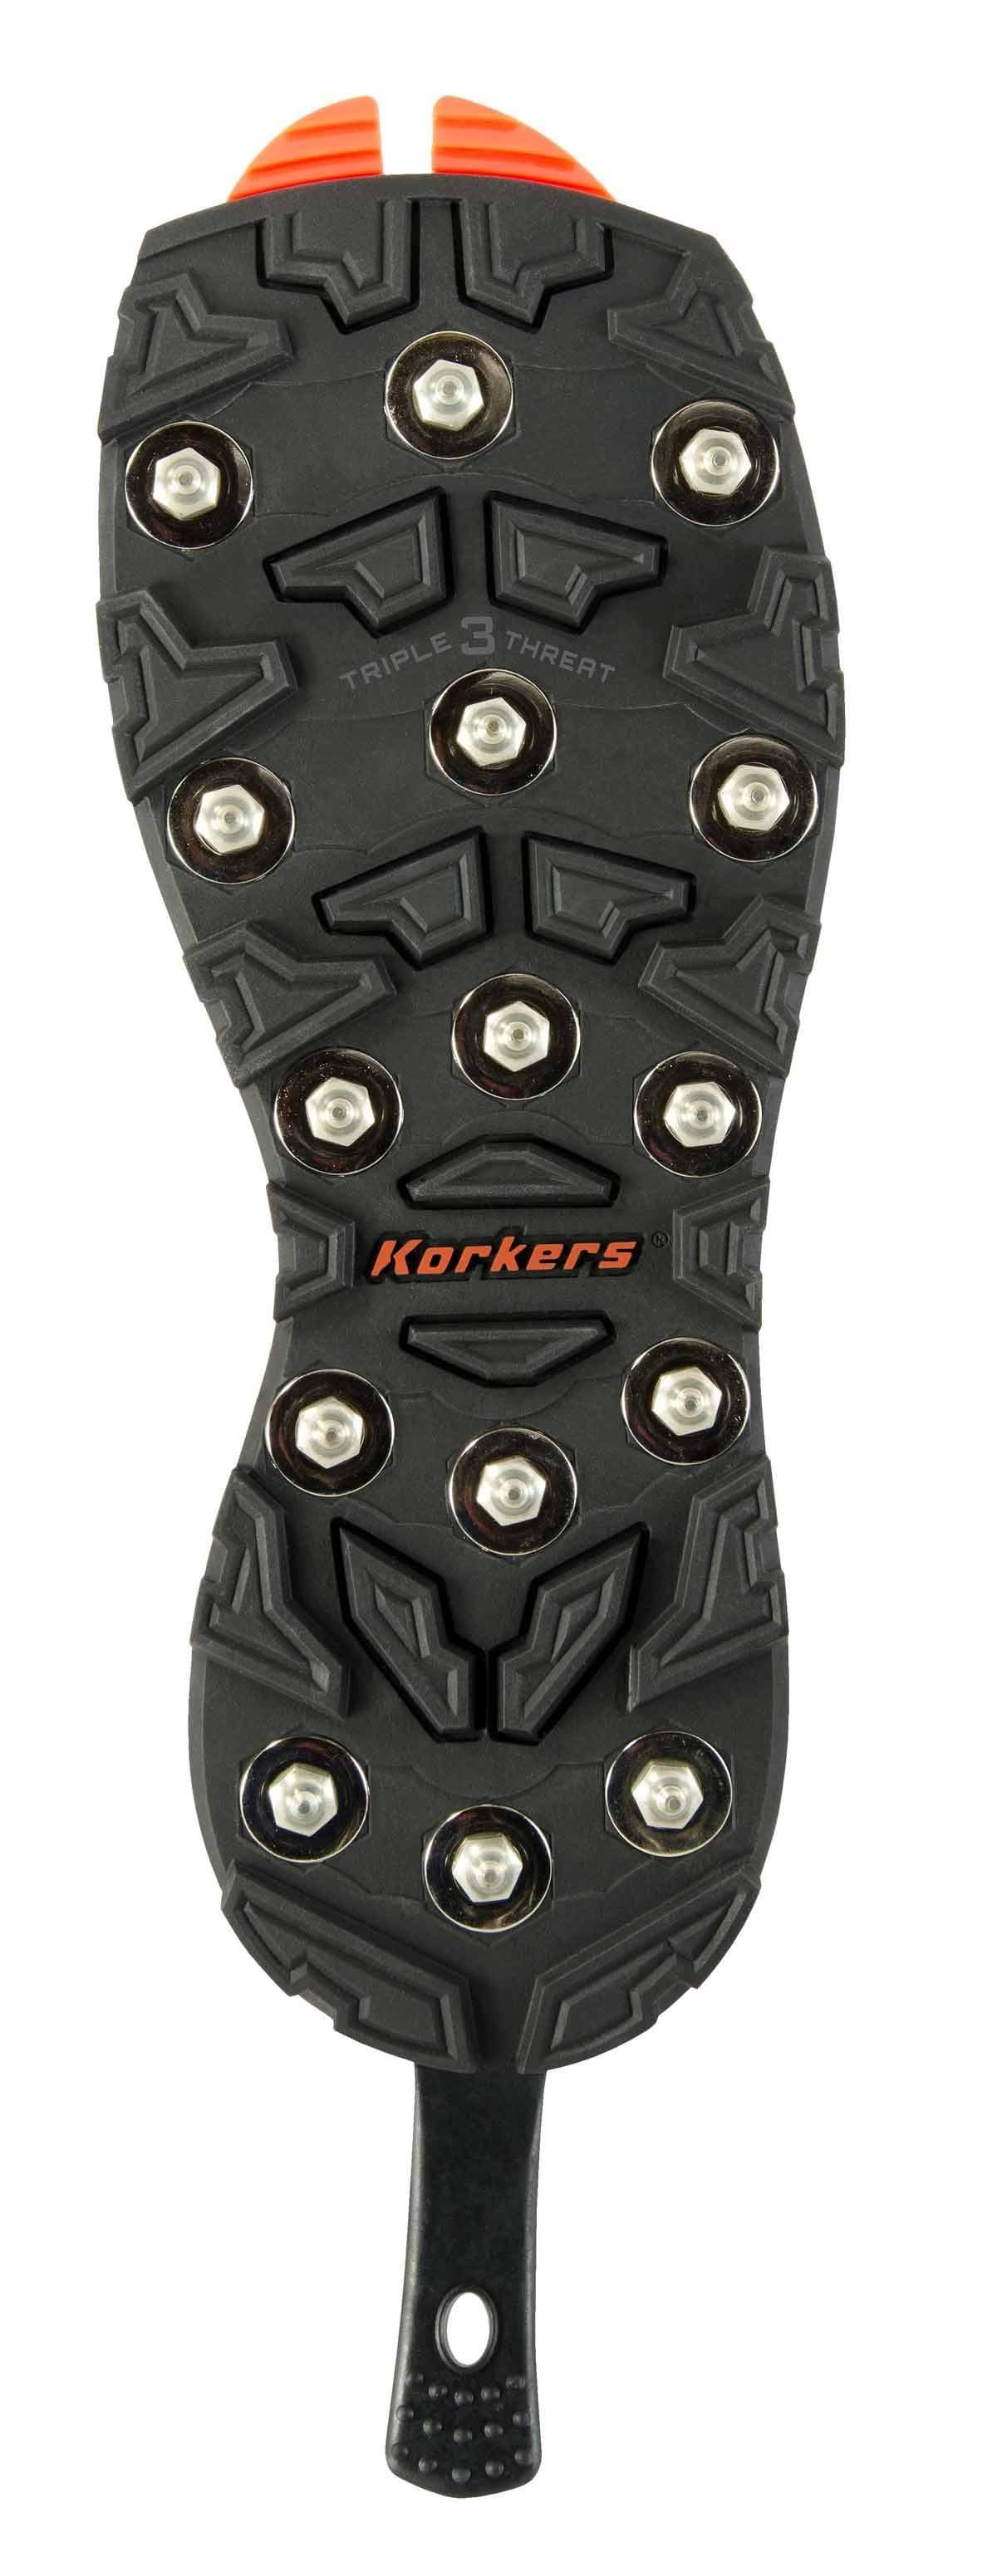 Korkers OmniTrax v3.0 Triple Threat Soles - Carbide Spikes 5